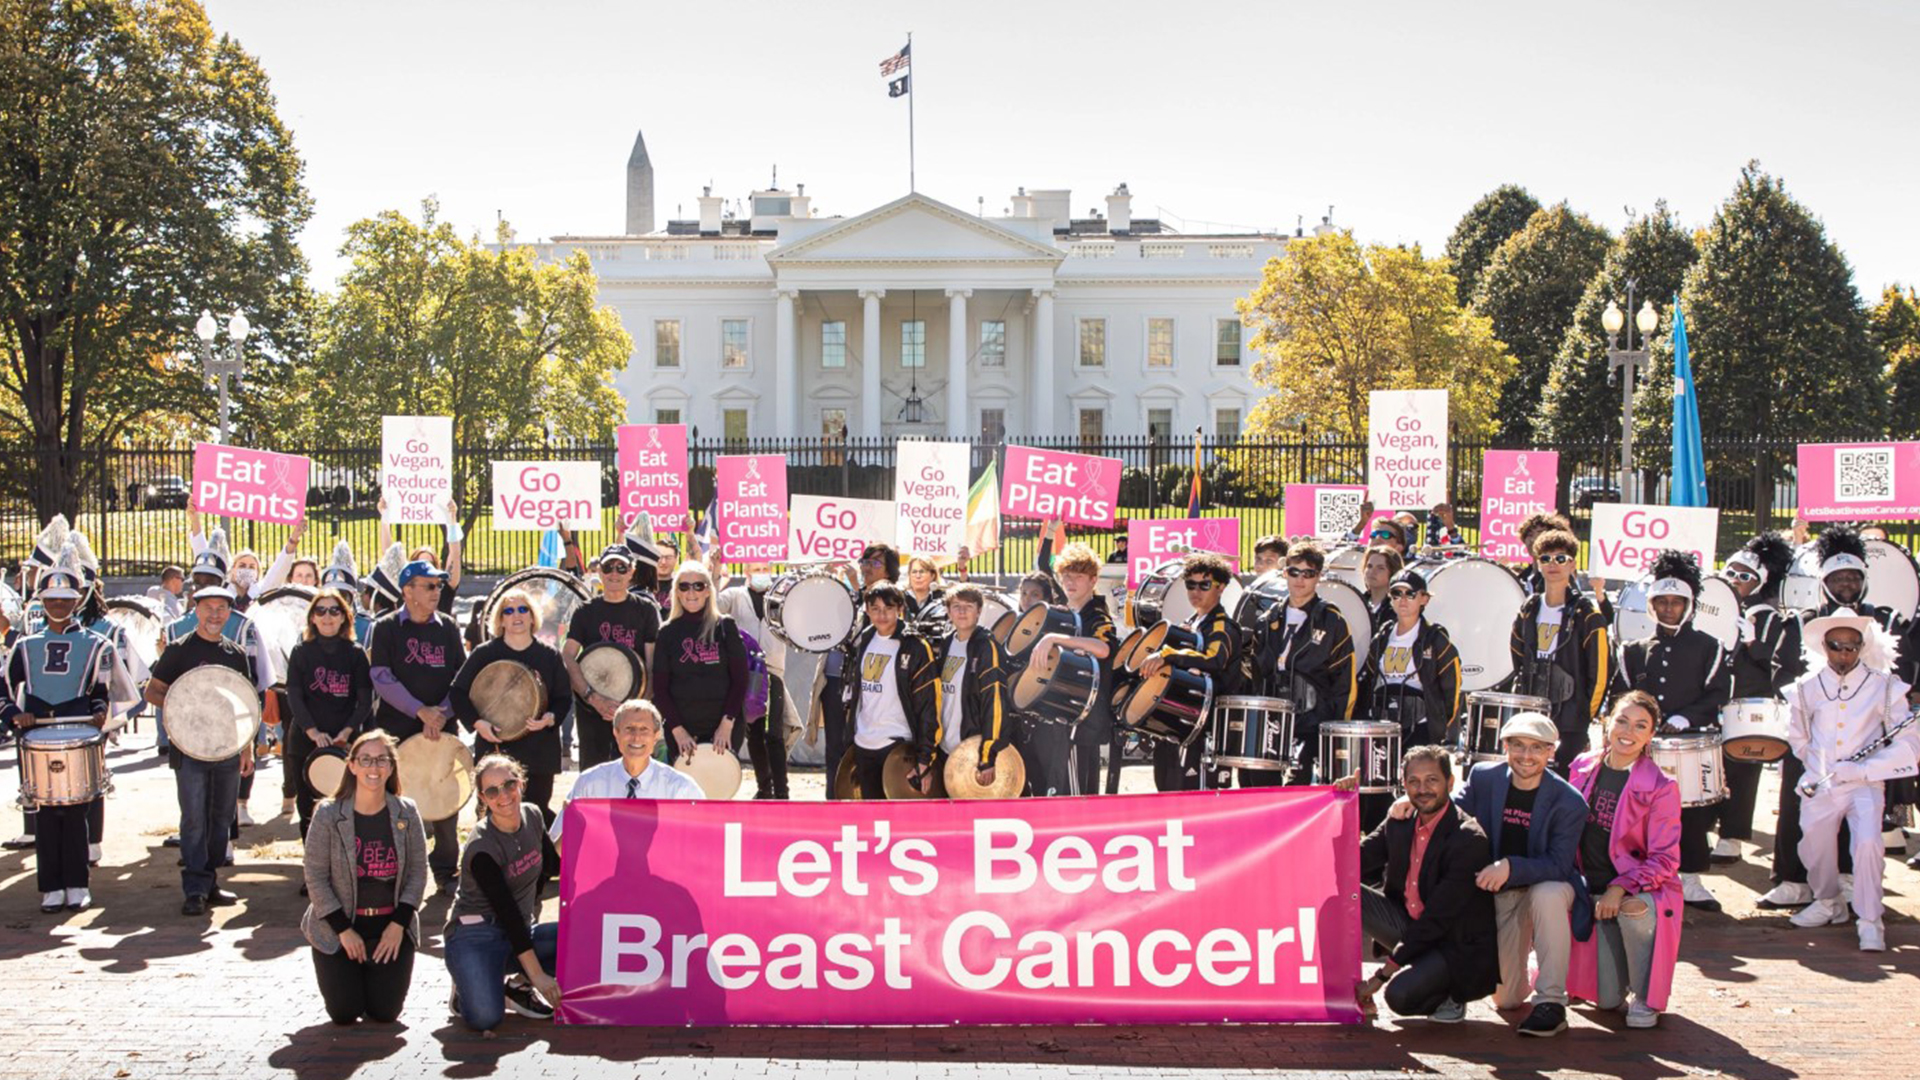 Let’s Beat Breast Cancer Rally | Physicians Committee for Responsible Medicine